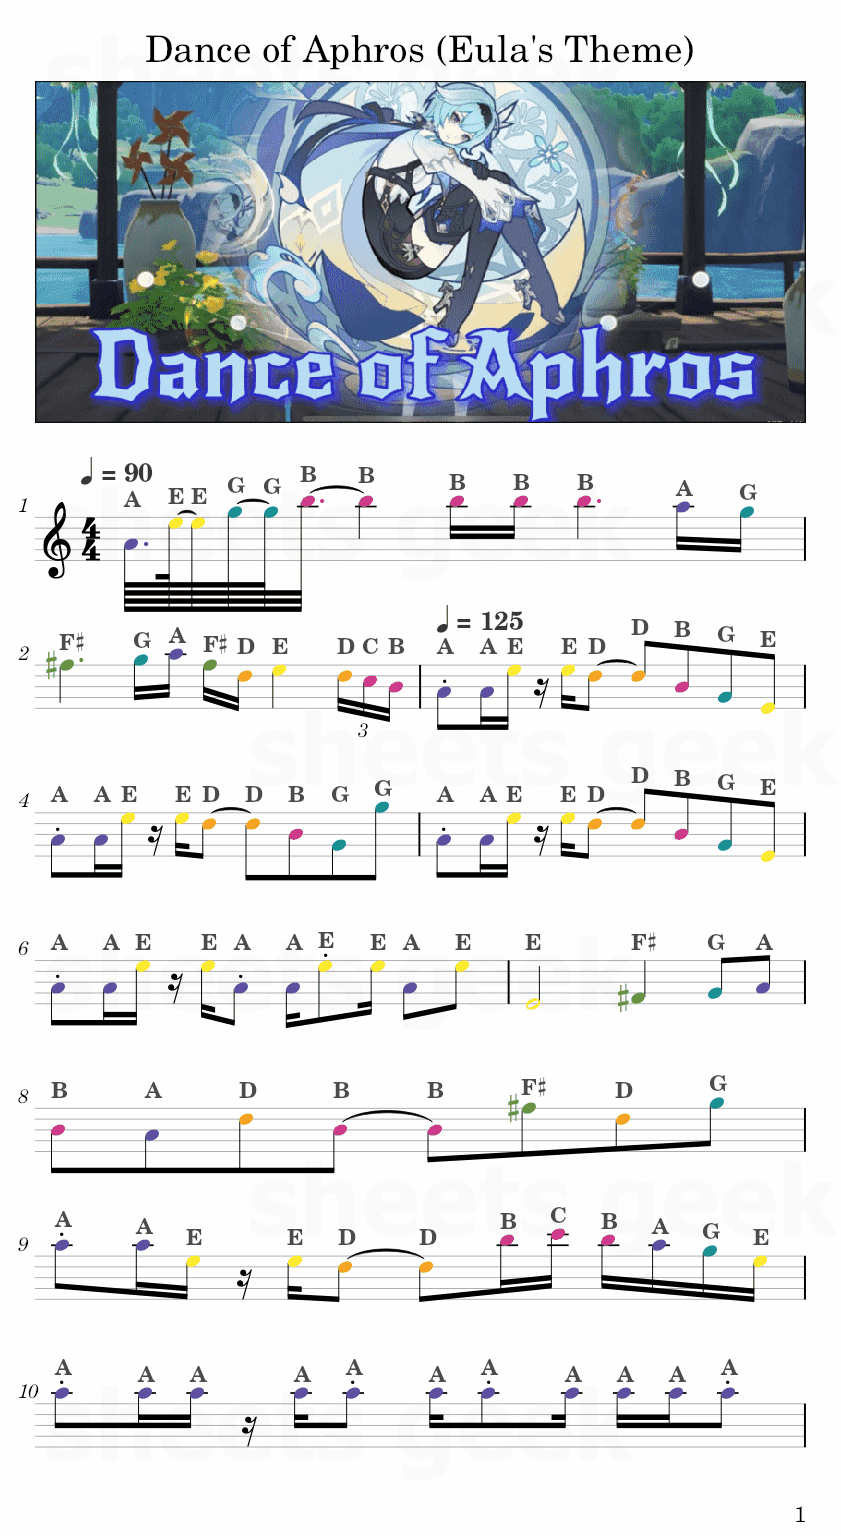 Dance of Aphros Eula's Theme - Genshin Impact Easy Sheet Music Free for piano, keyboard, flute, violin, sax, cello page 1